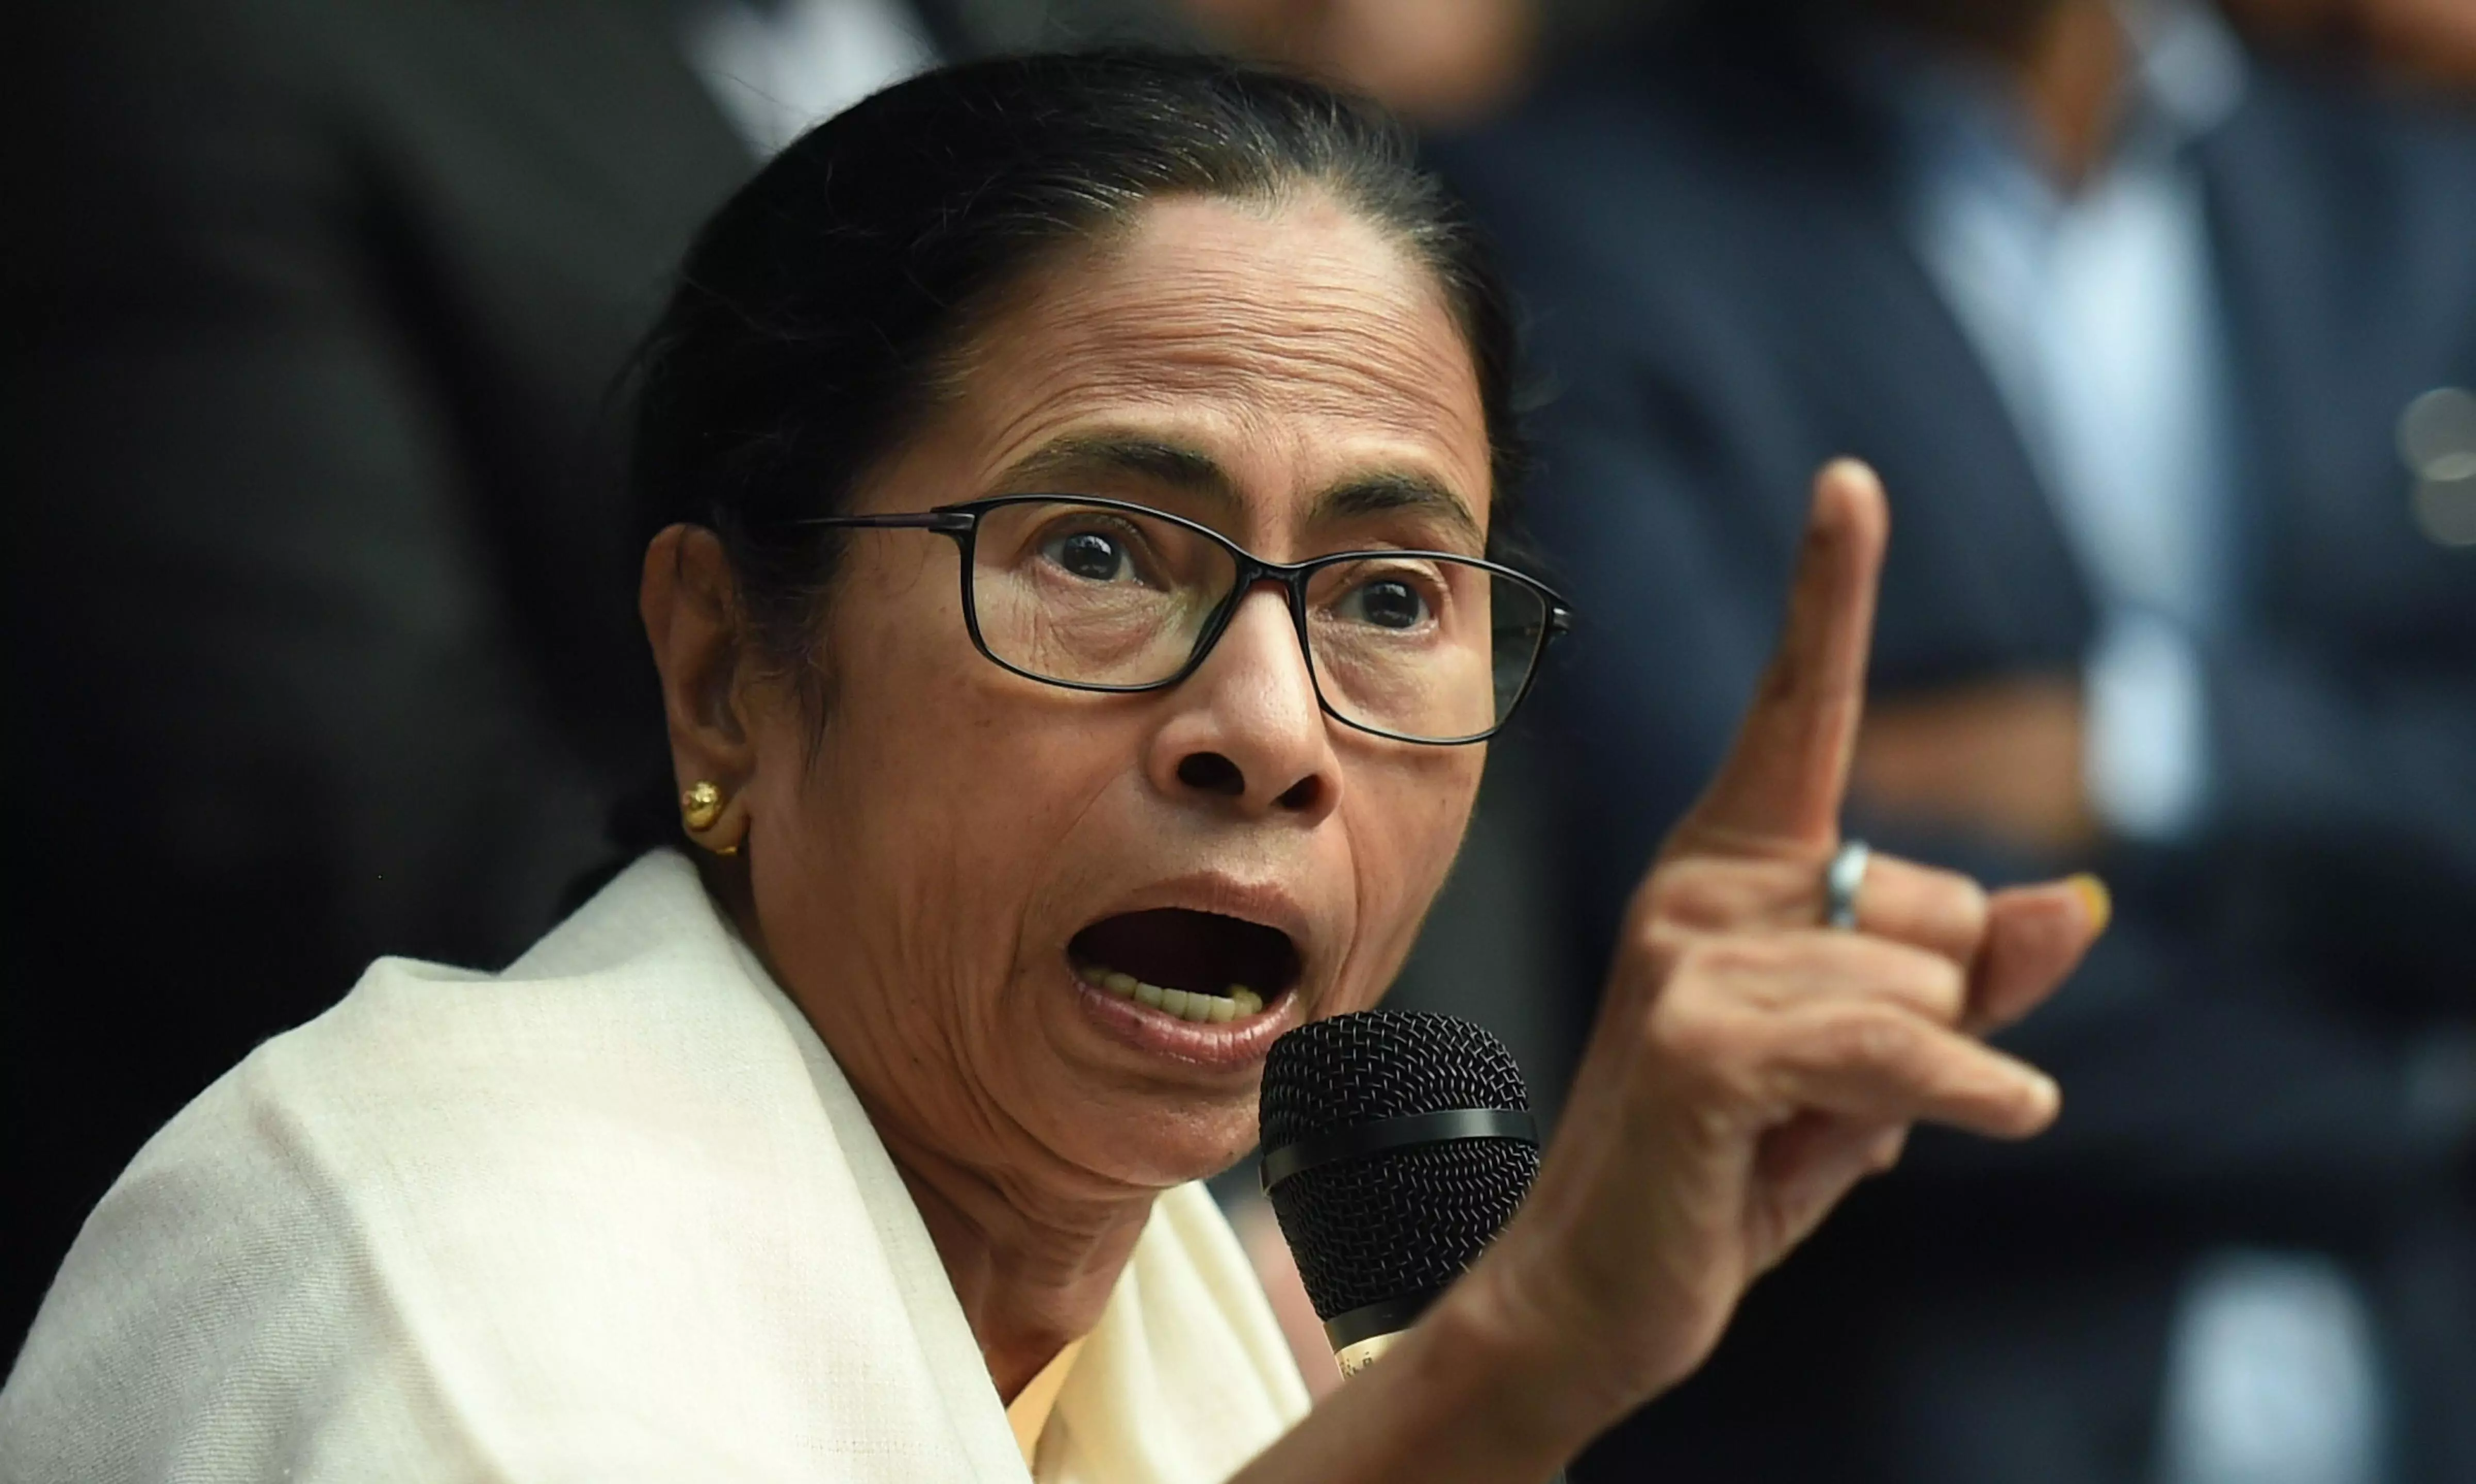 EC chalked out seven-phase polls to assist BJP campaigning: Mamata